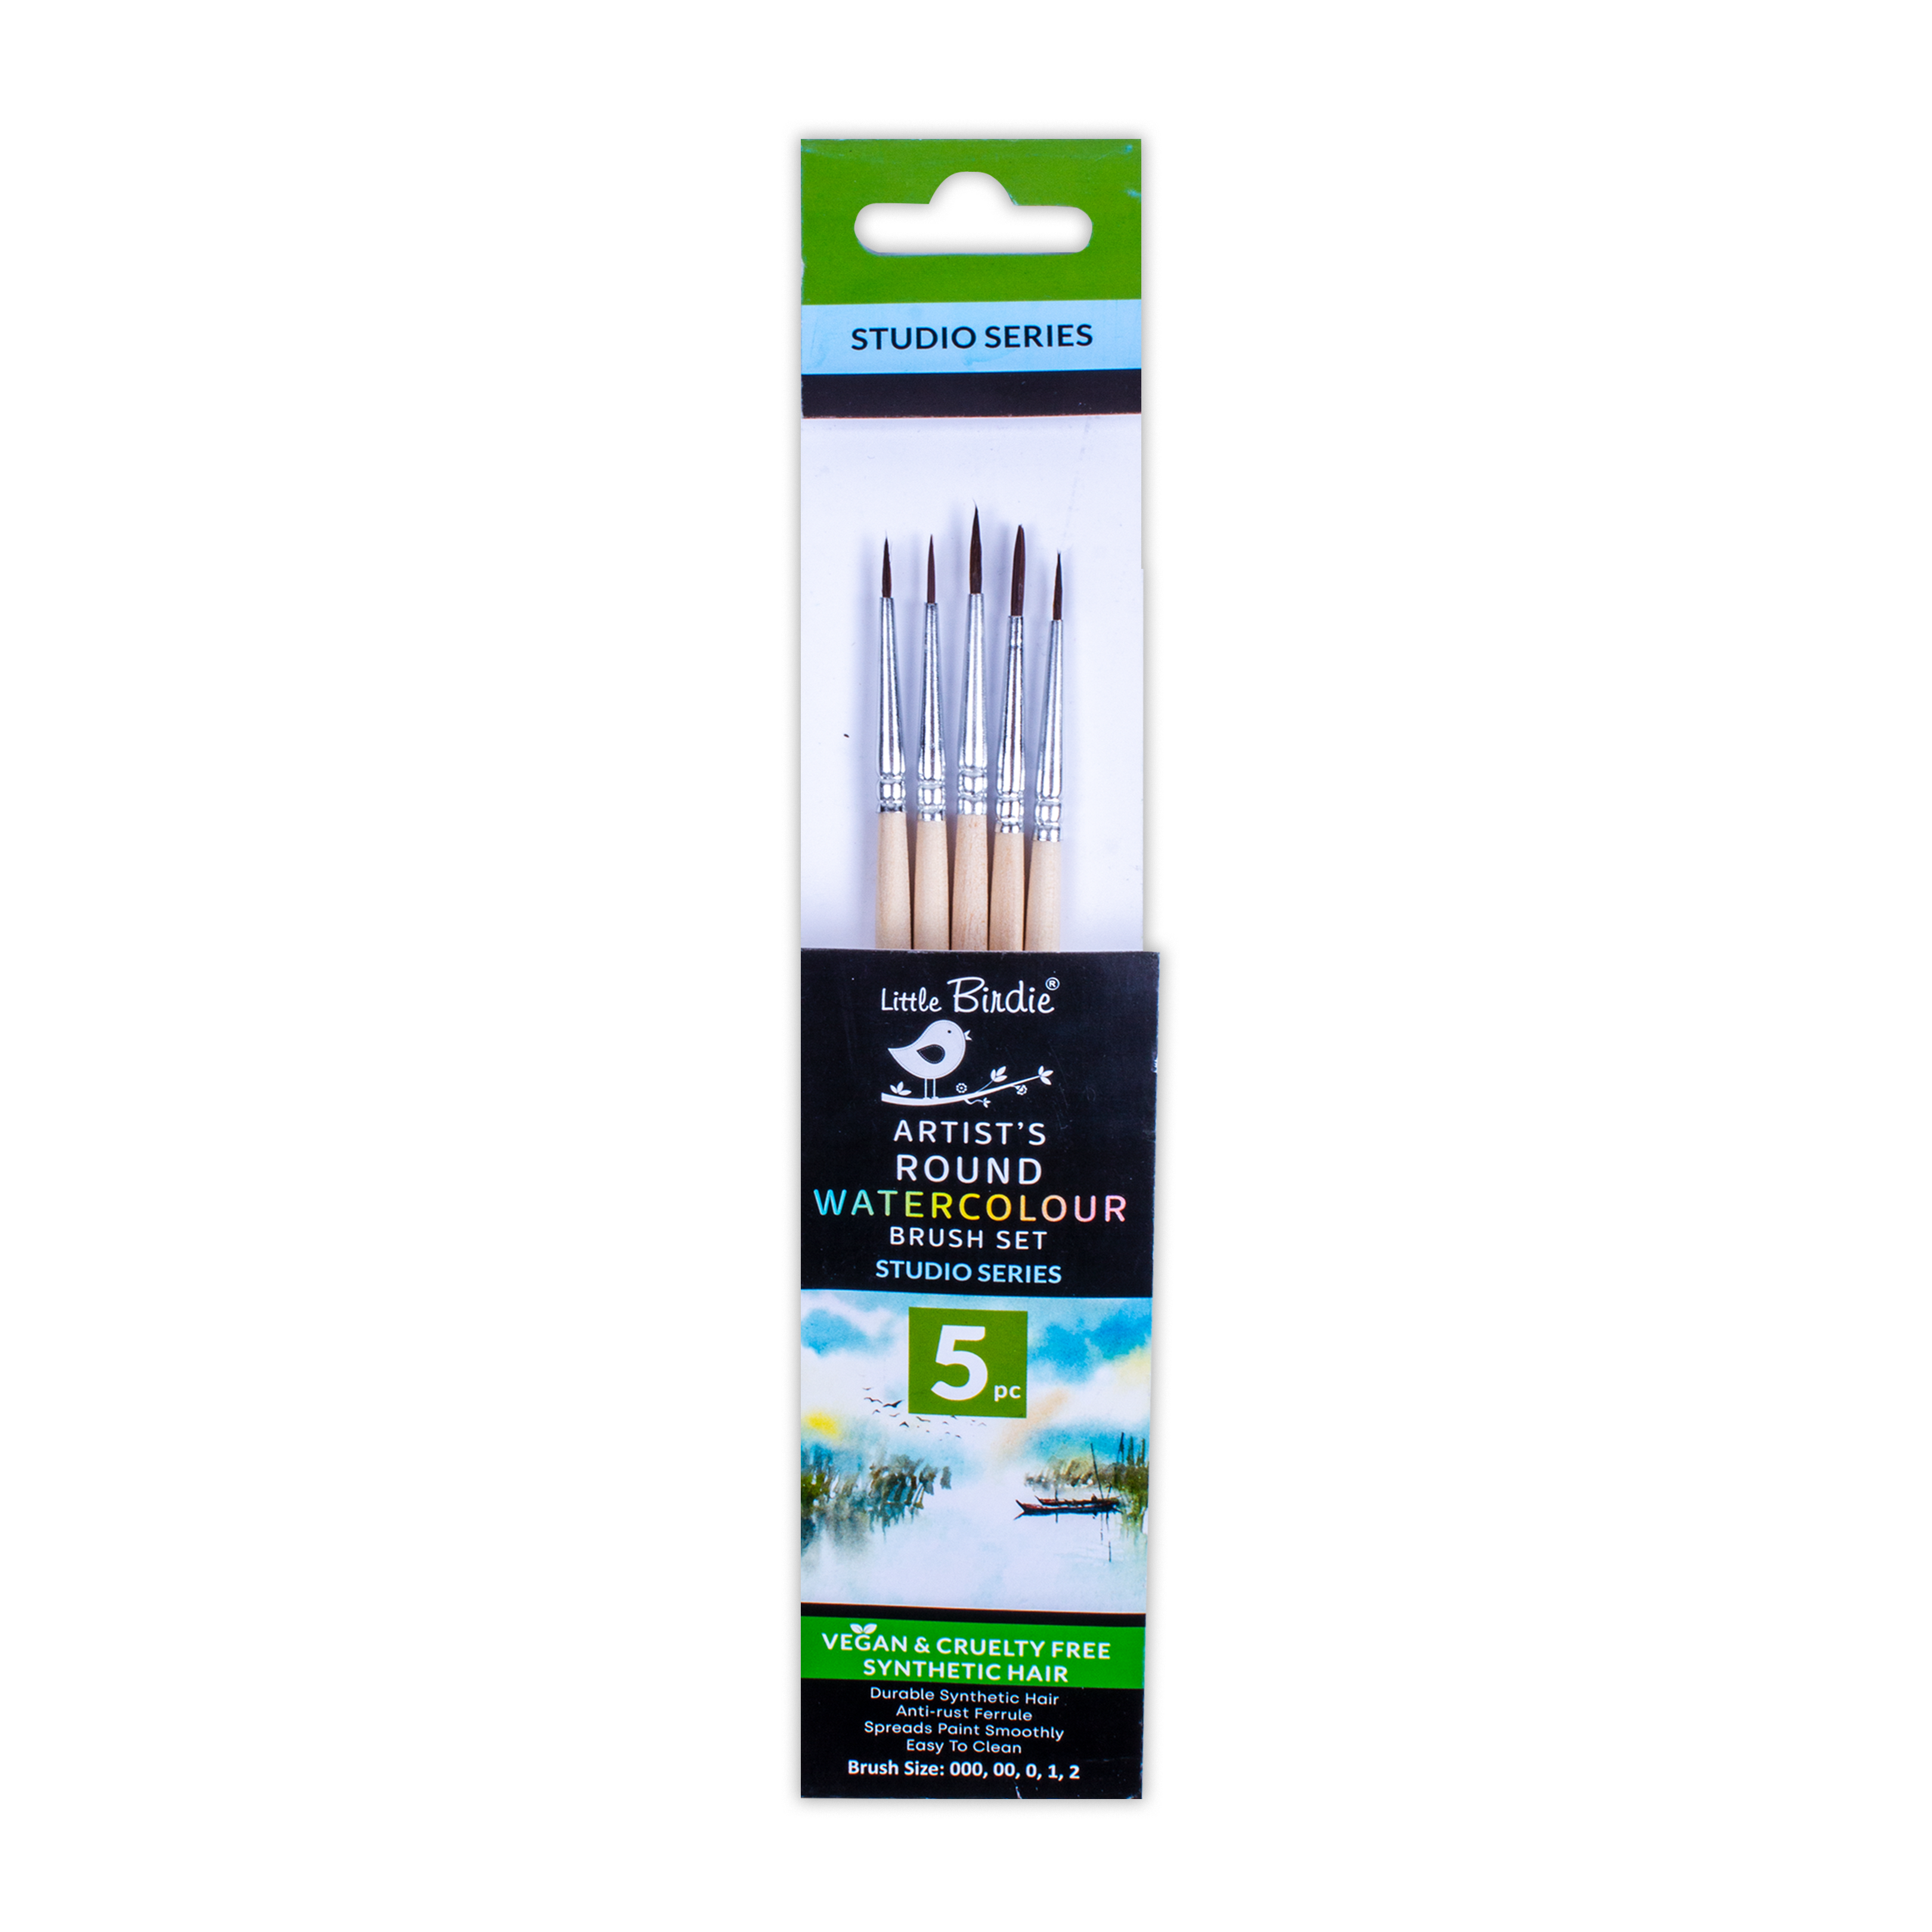 Watercolour Brush Round Synthetic Hair Size 000 00 0 1 2 Set of 5pc